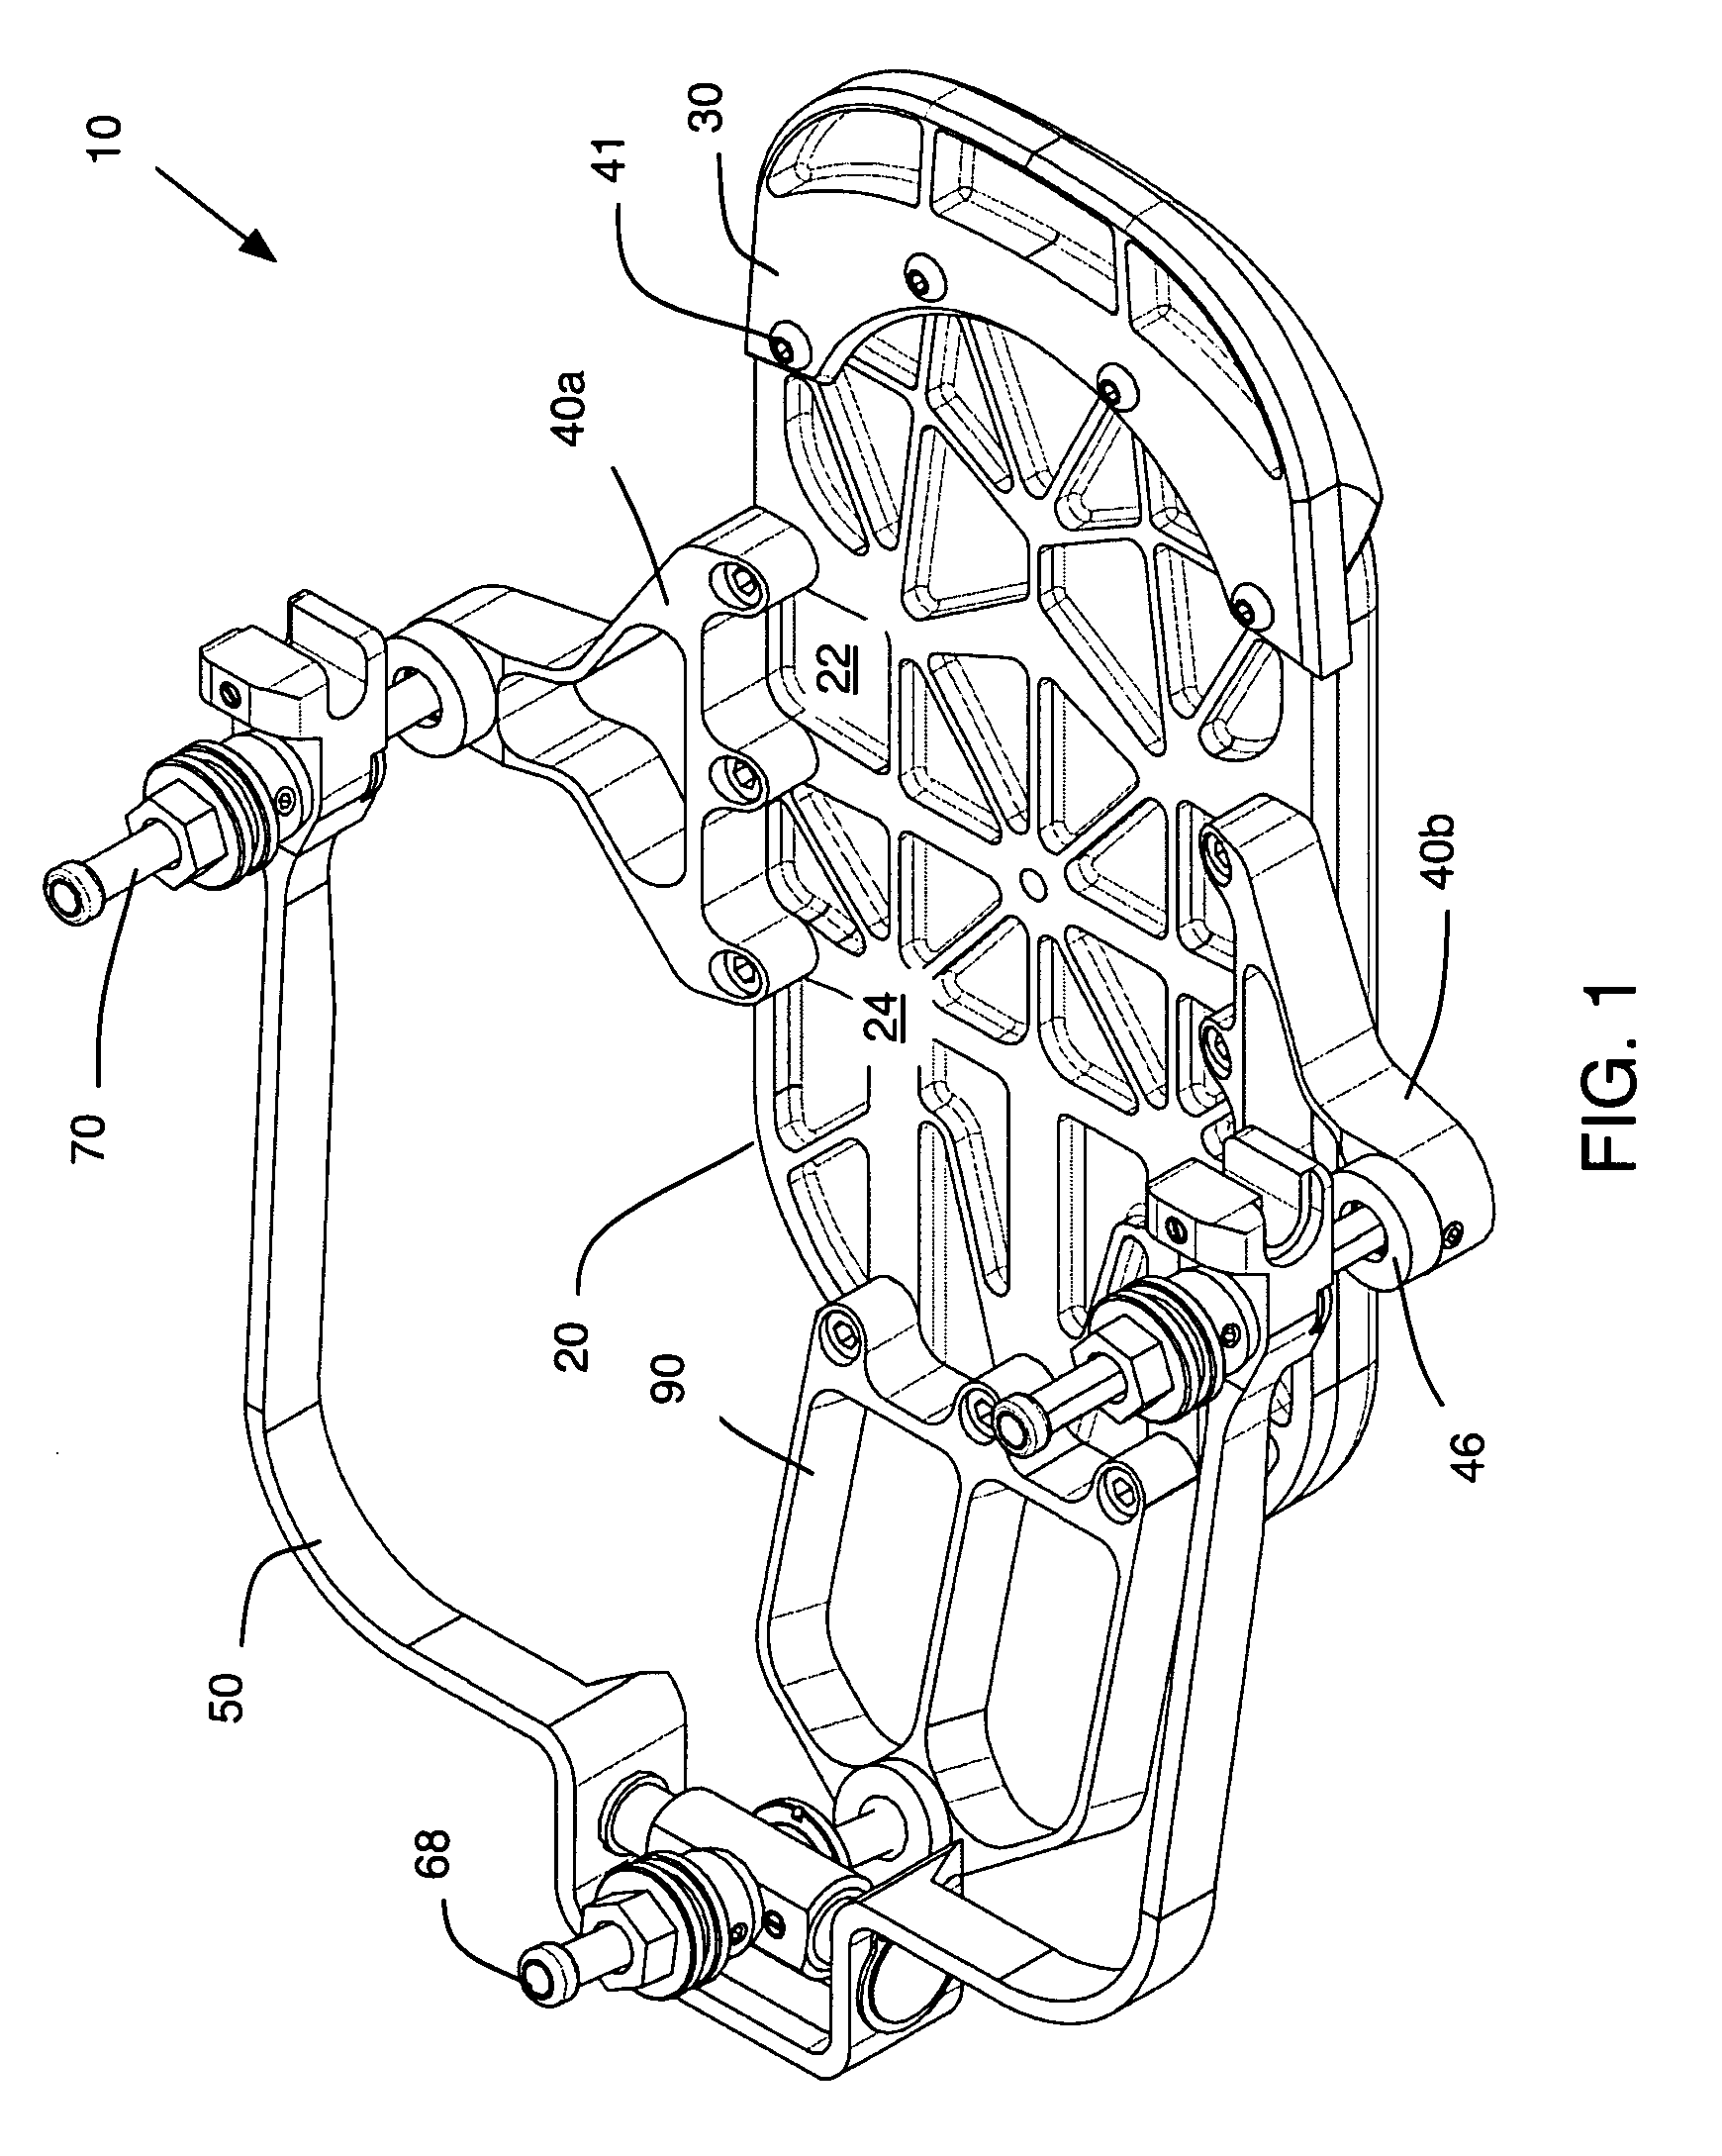 External fixation and foot-supporting device